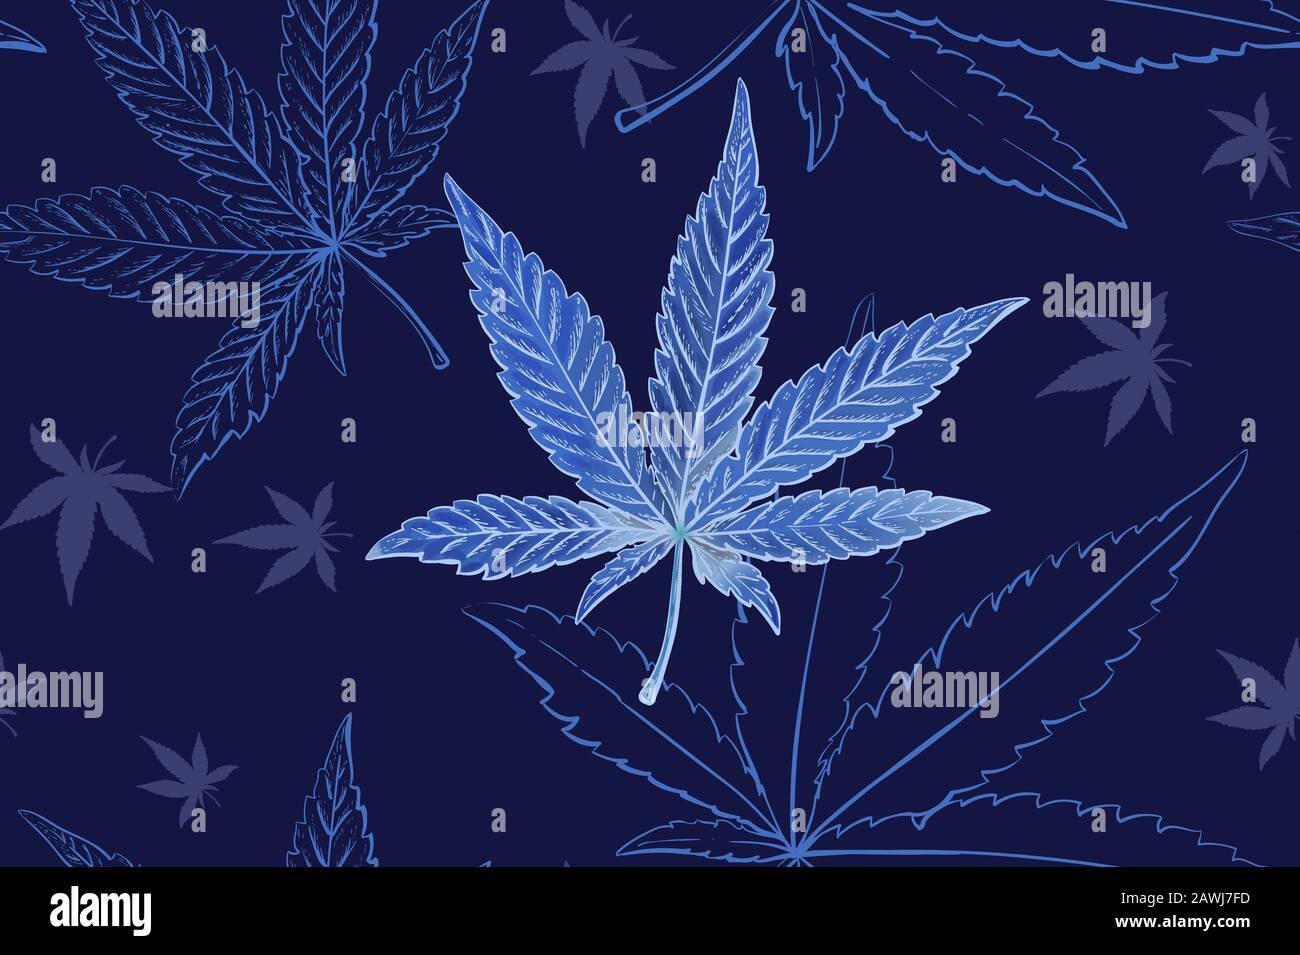 Seamless Pattern Of Cannabis Leaves Blue Or Turquoise